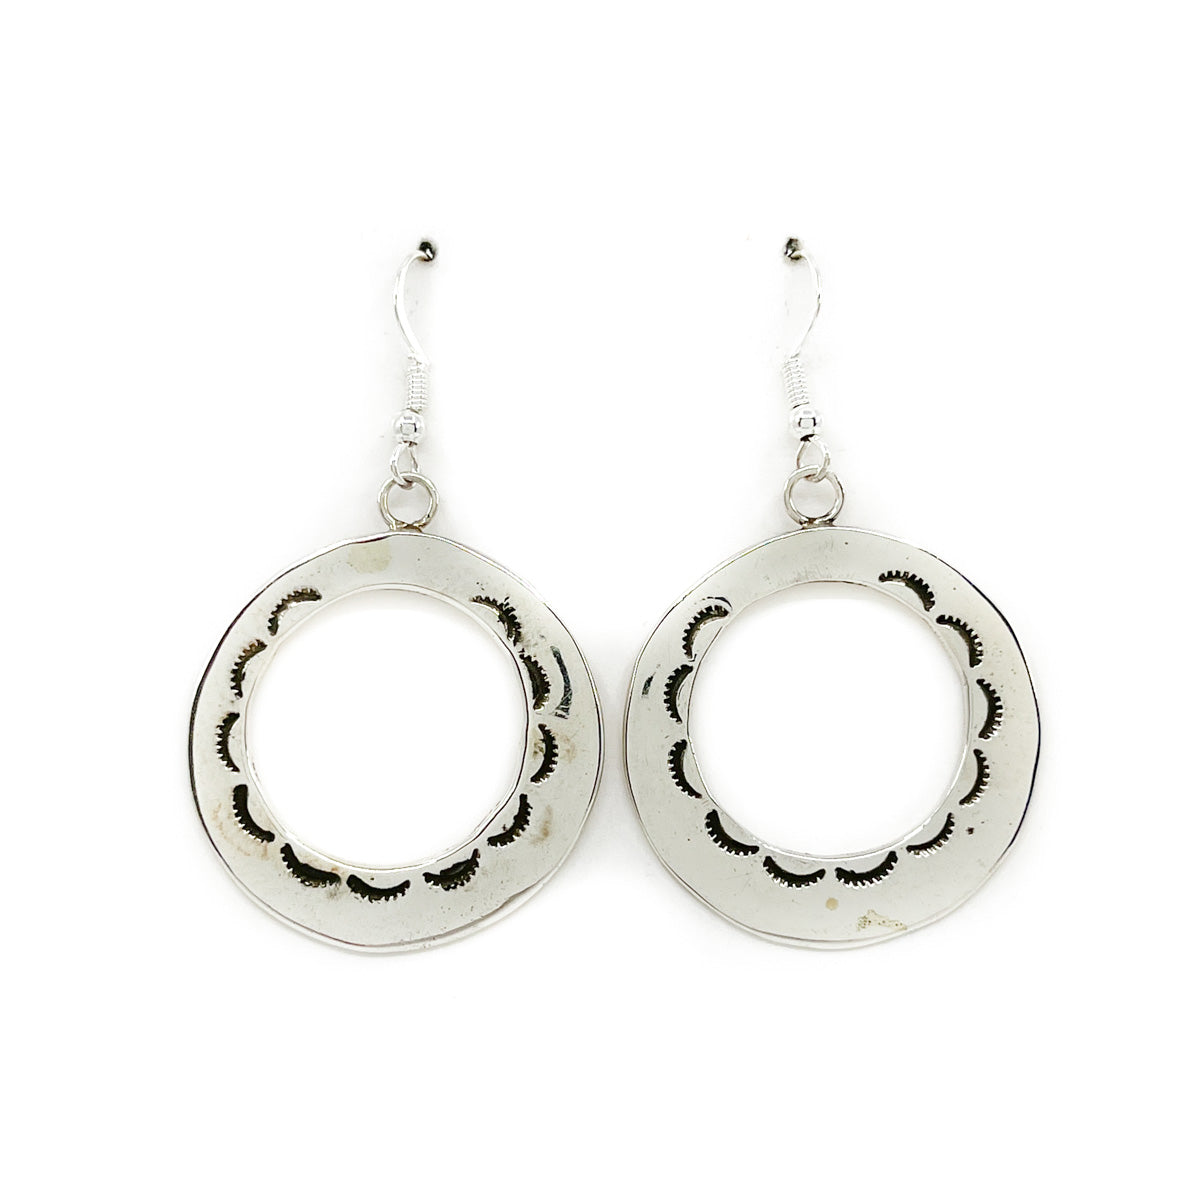 Round Dangle Earrings with Stamped Design